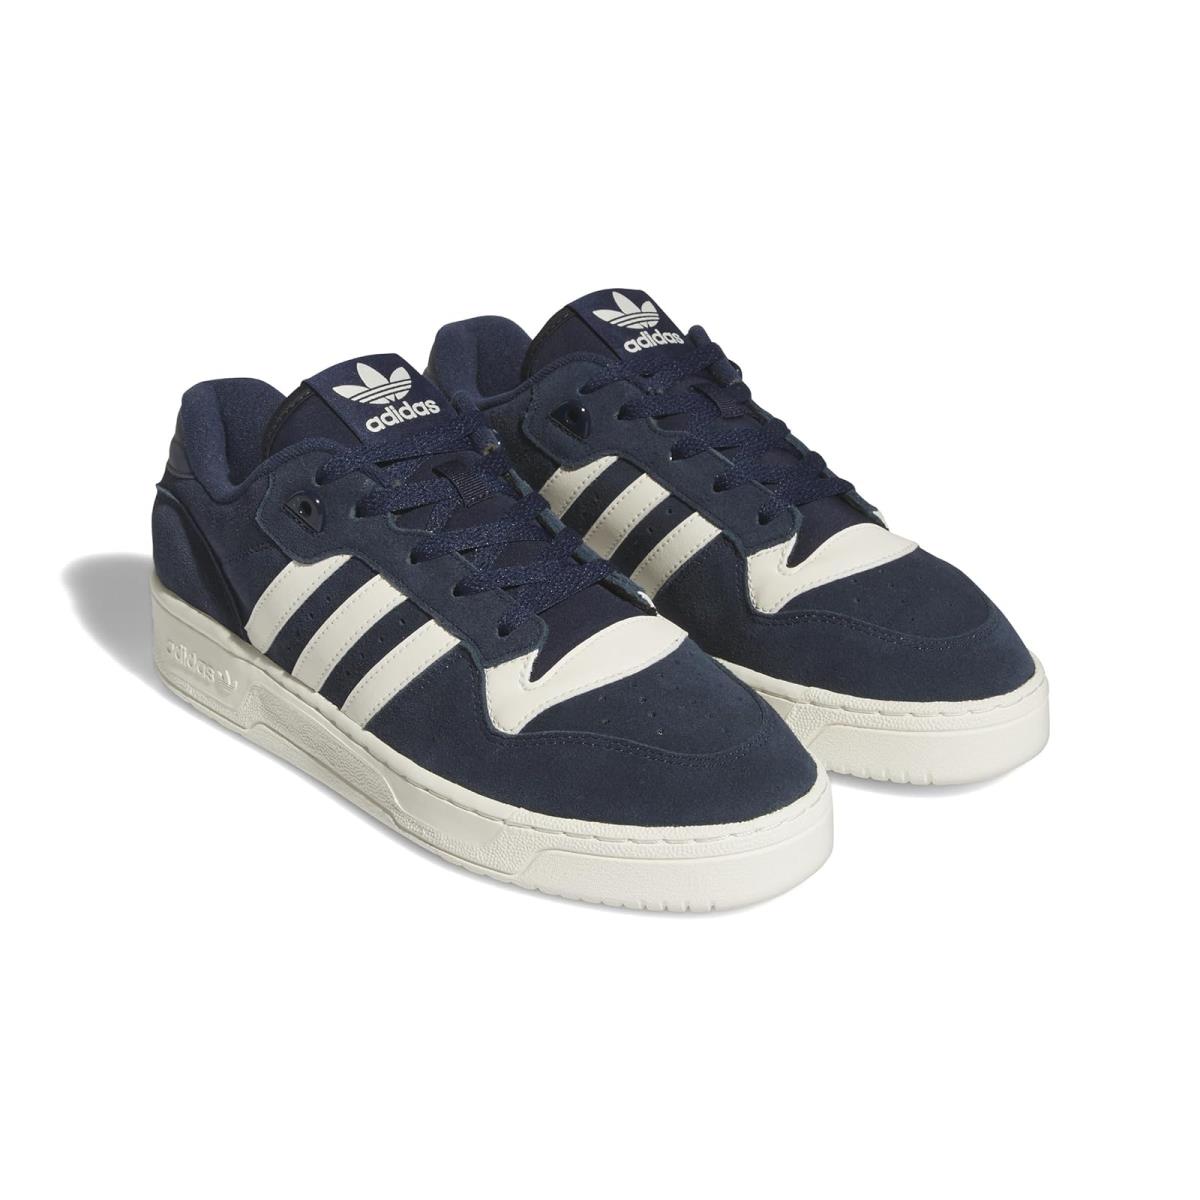 Man`s Sneakers Athletic Shoes Adidas Originals Rivalry Low Collegiate Navy/Cloud White/Collegiate Navy